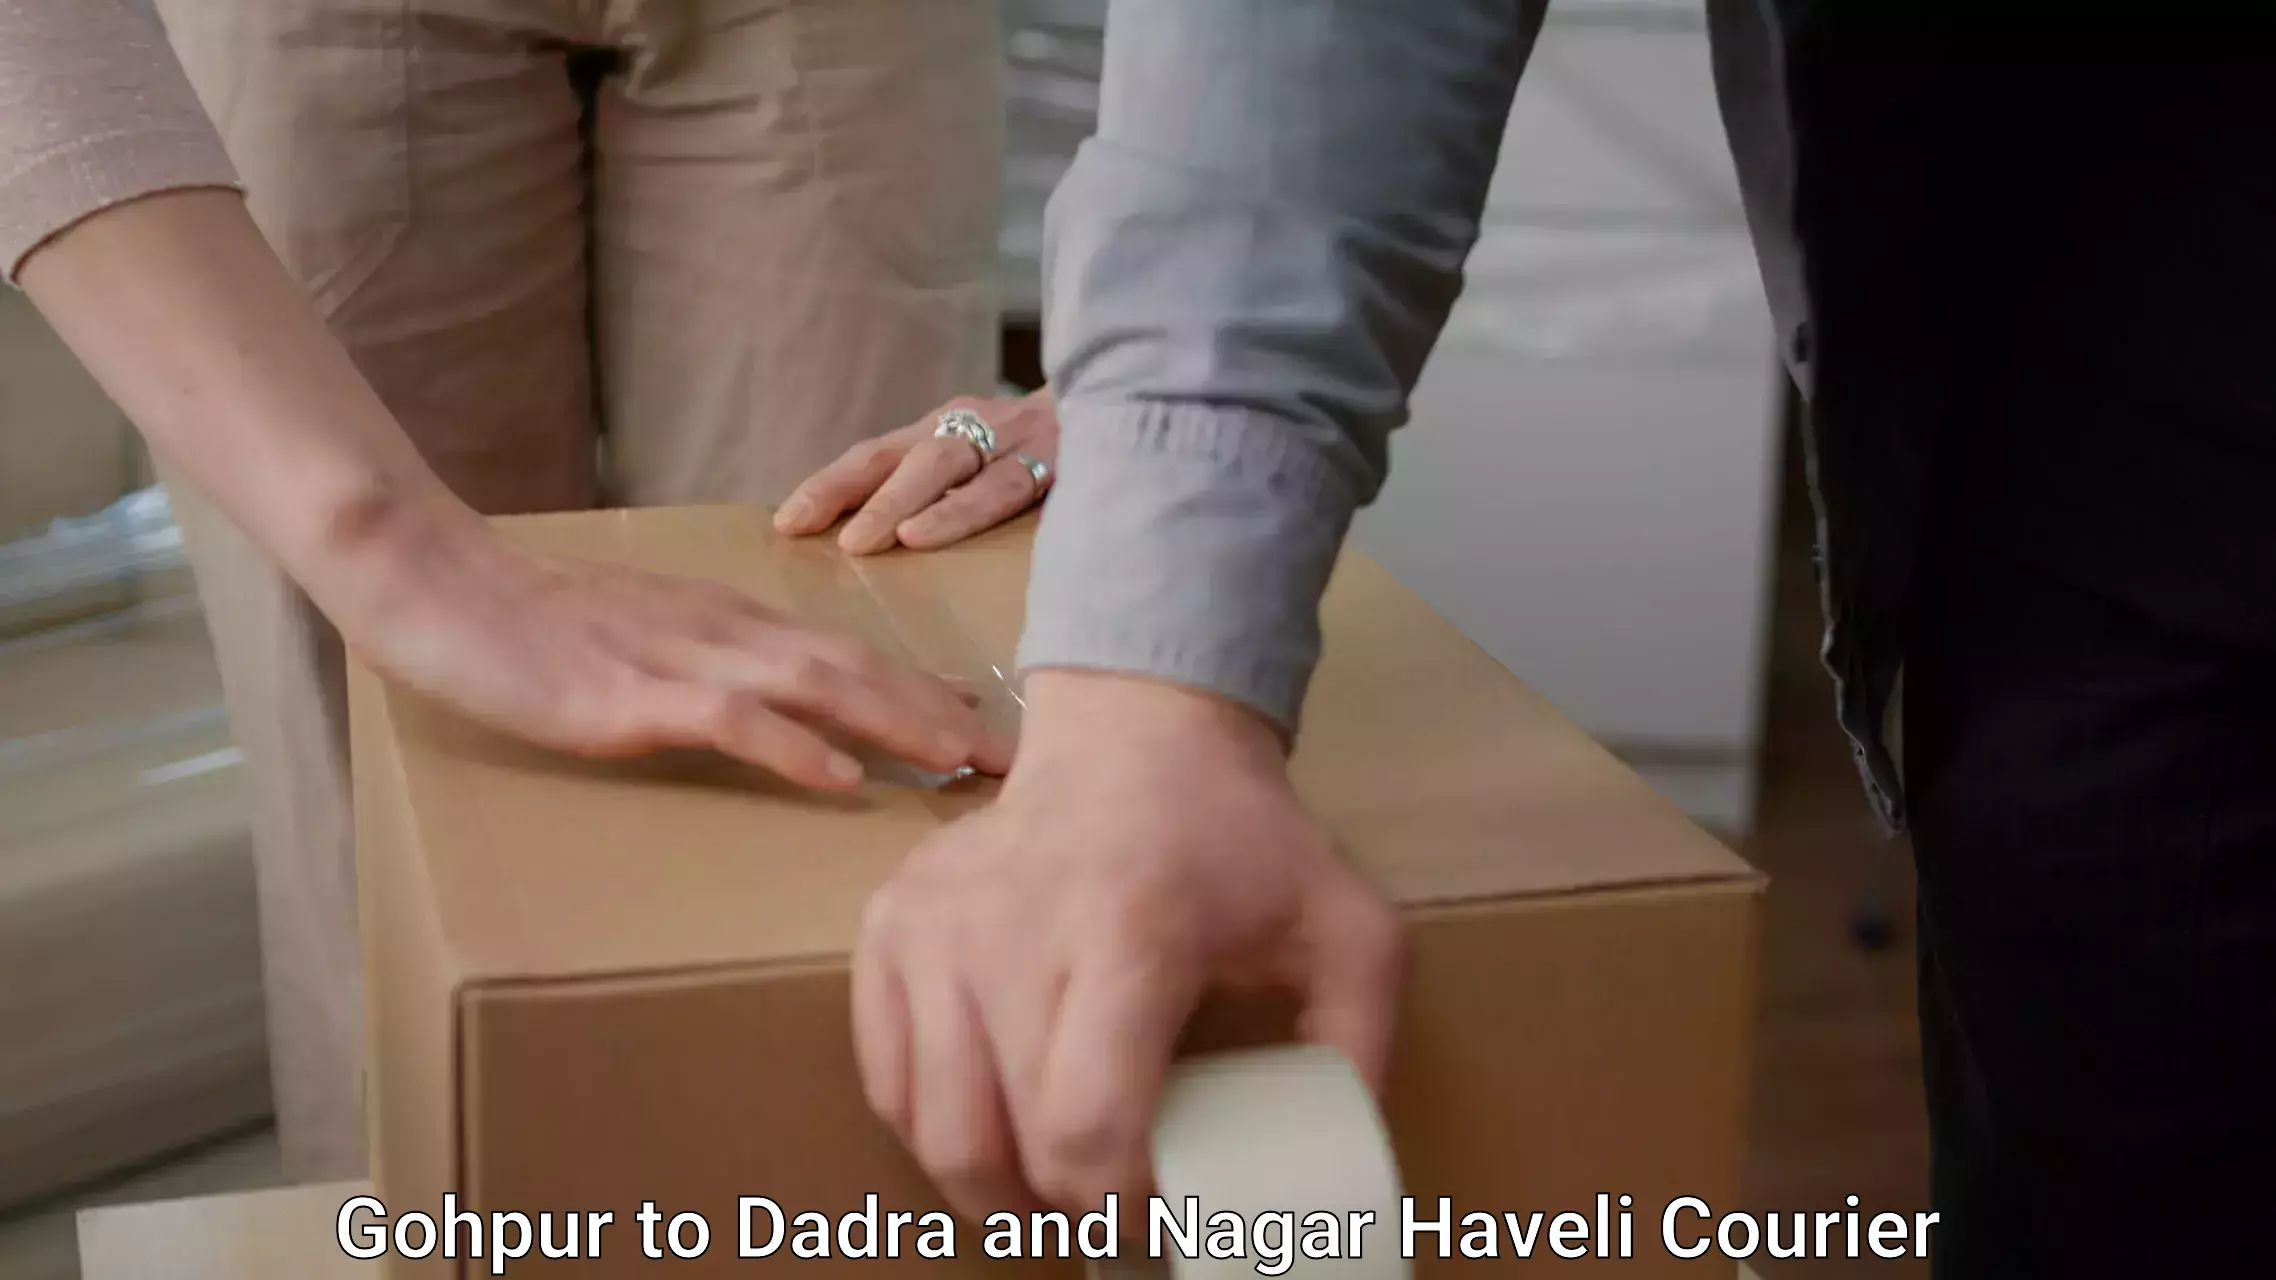 Efficient packing and moving Gohpur to Dadra and Nagar Haveli